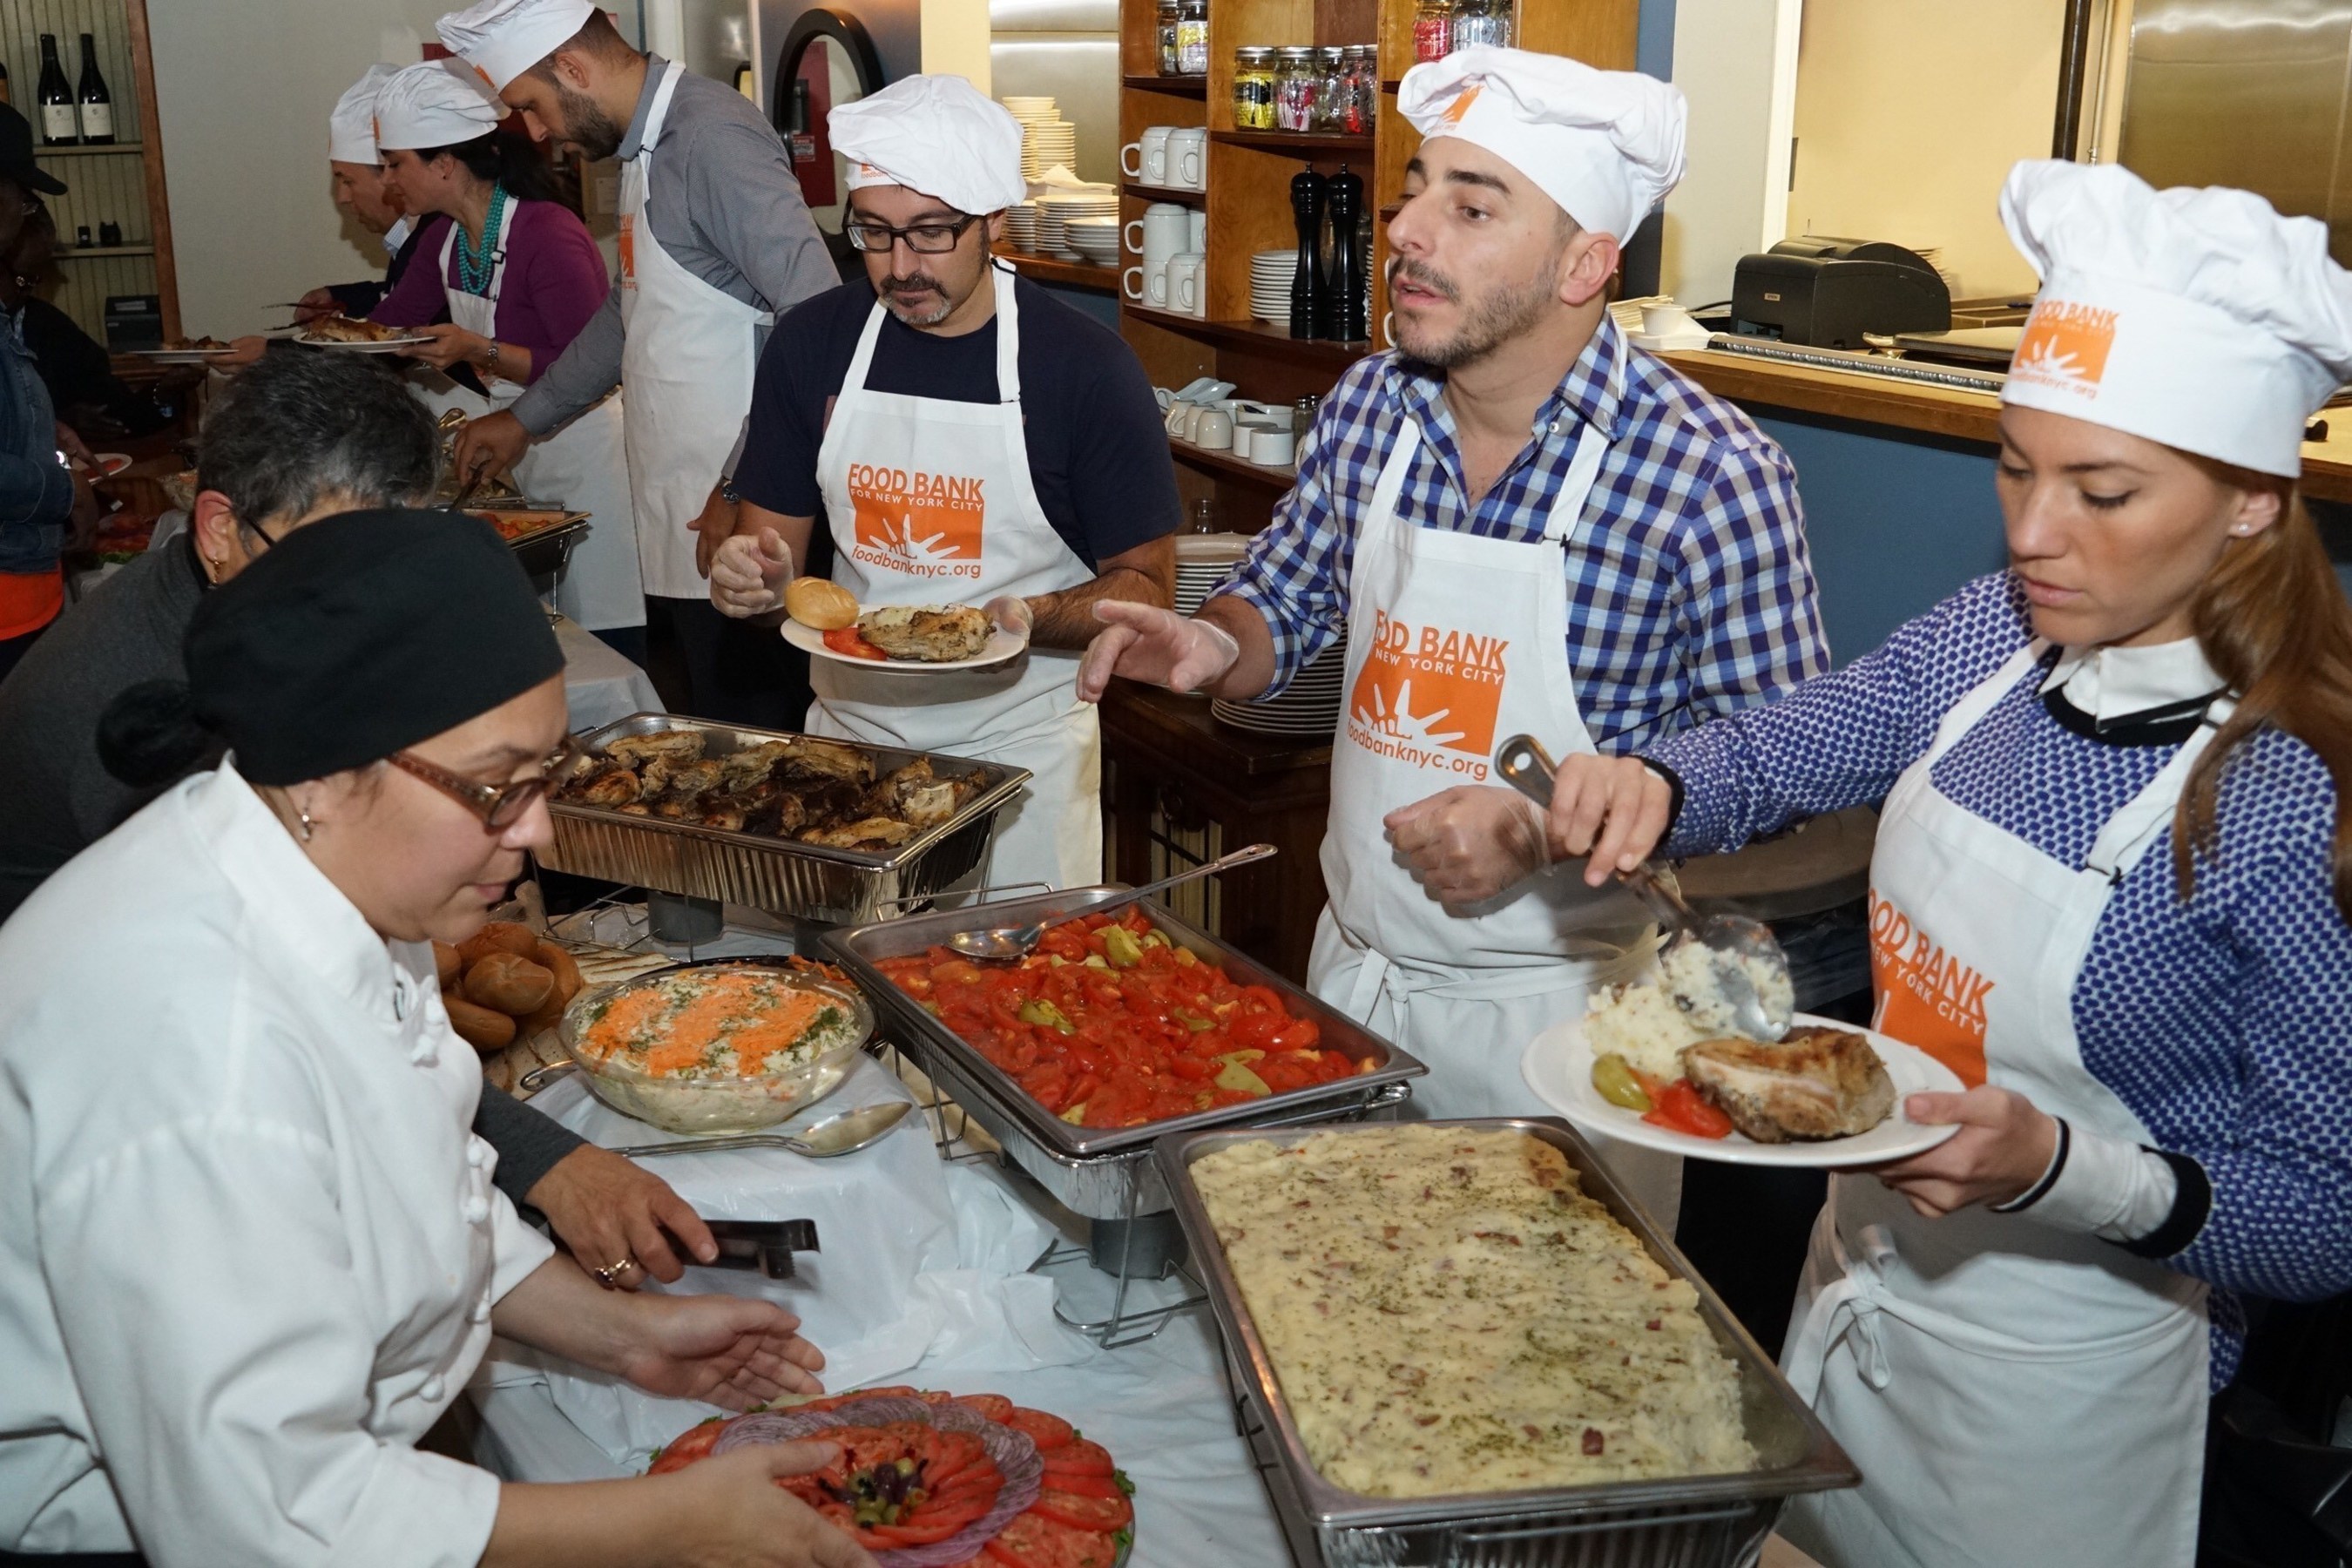 Chef Jordi Roca and BBVA Compass employees help serve hot meals to 100 seniors at the Food Bank for New York City's West Harlem Community Kitchen.